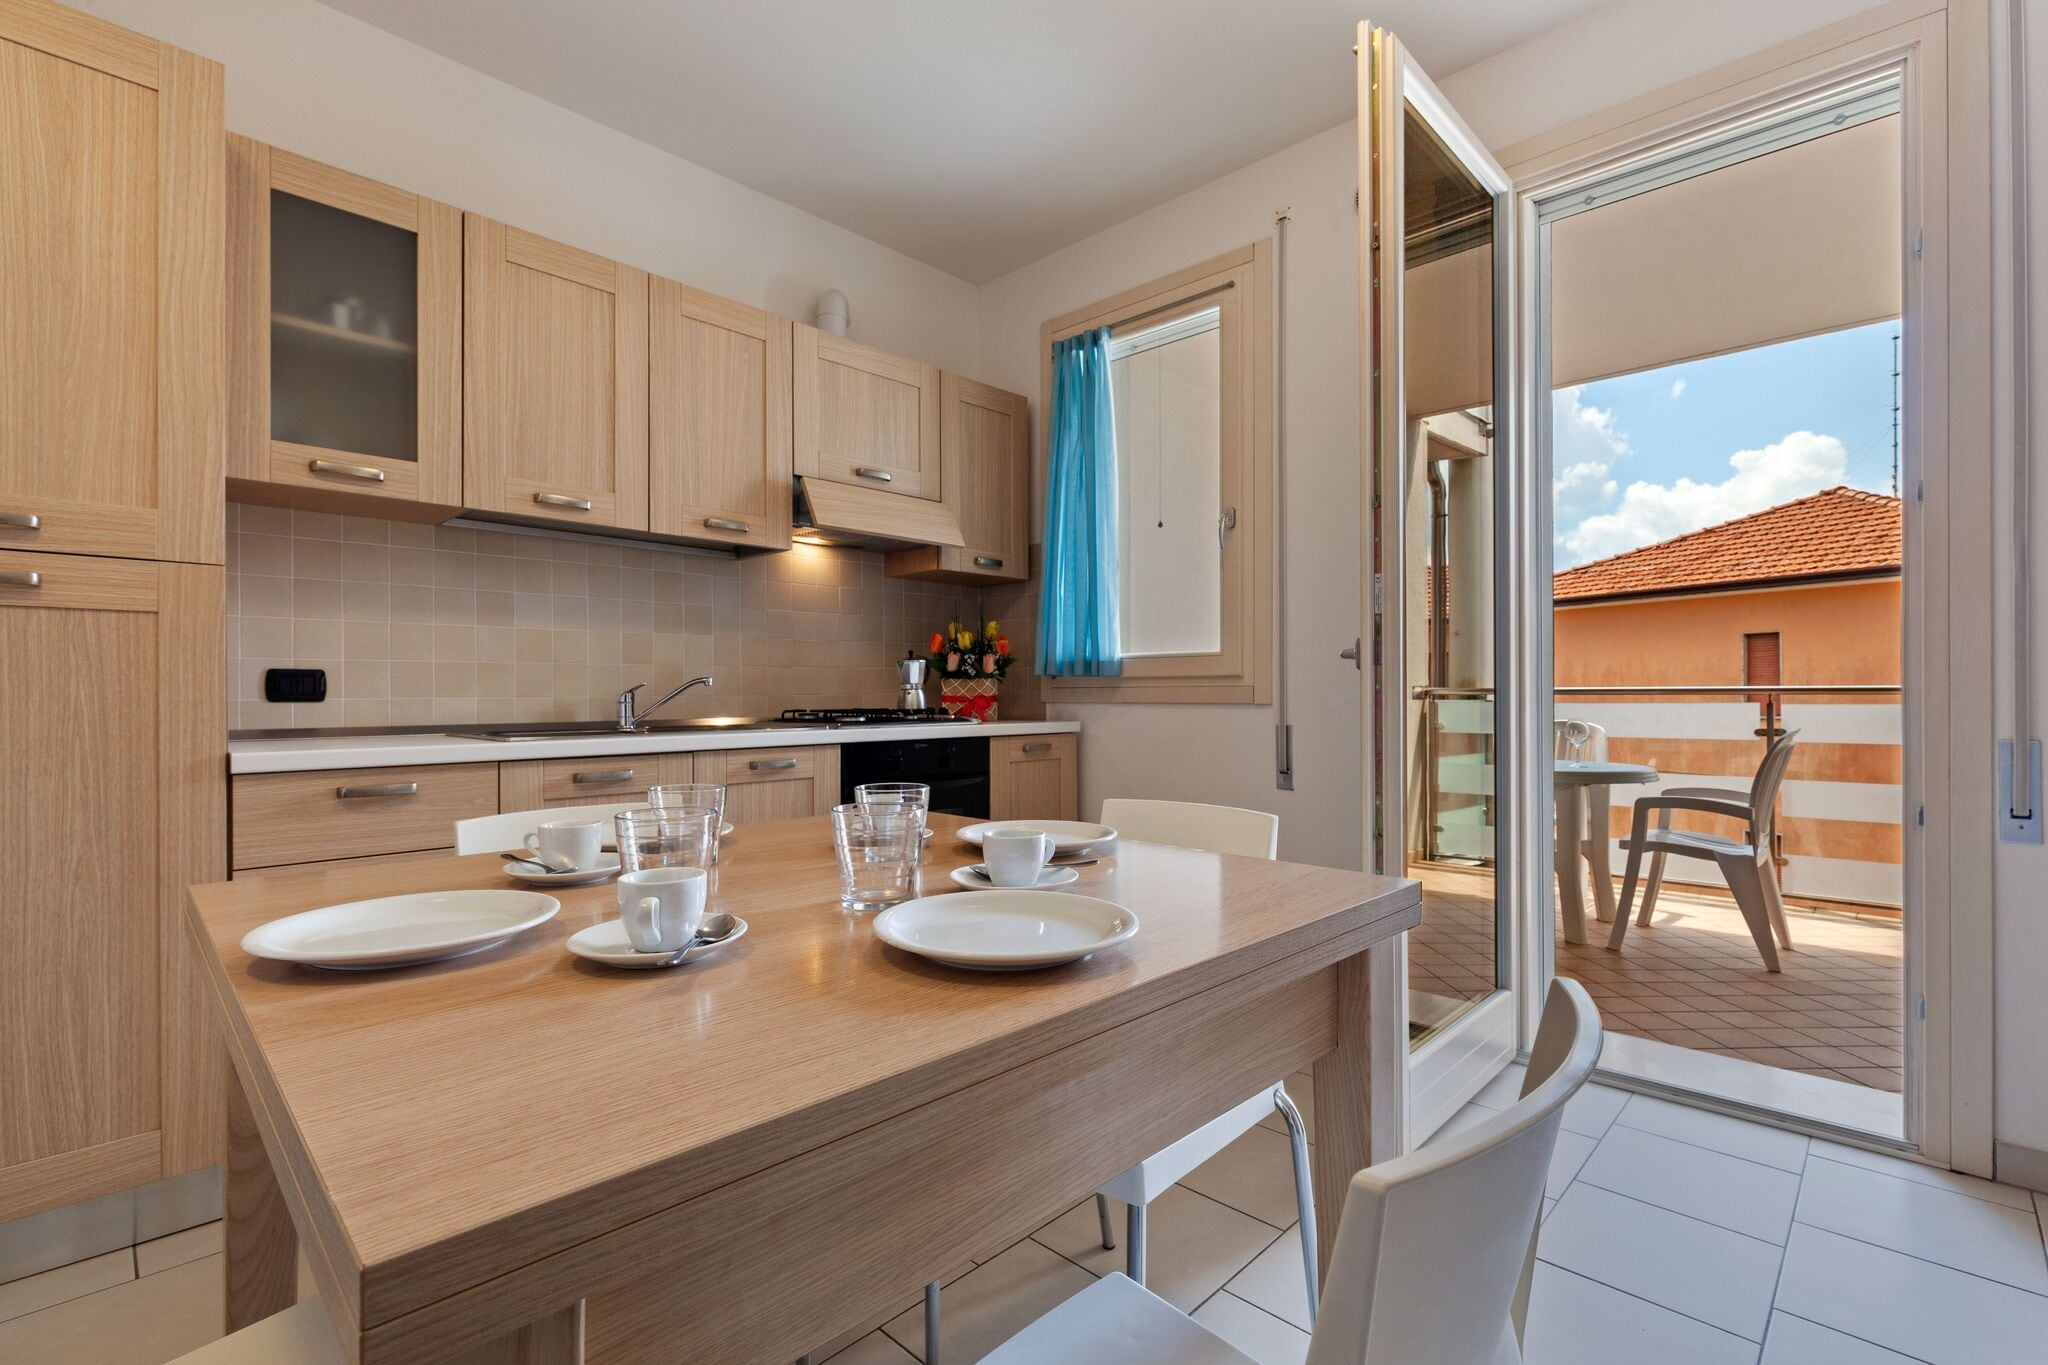 Modern holiday home close to the sea, in Rosolina Mare, near Venice